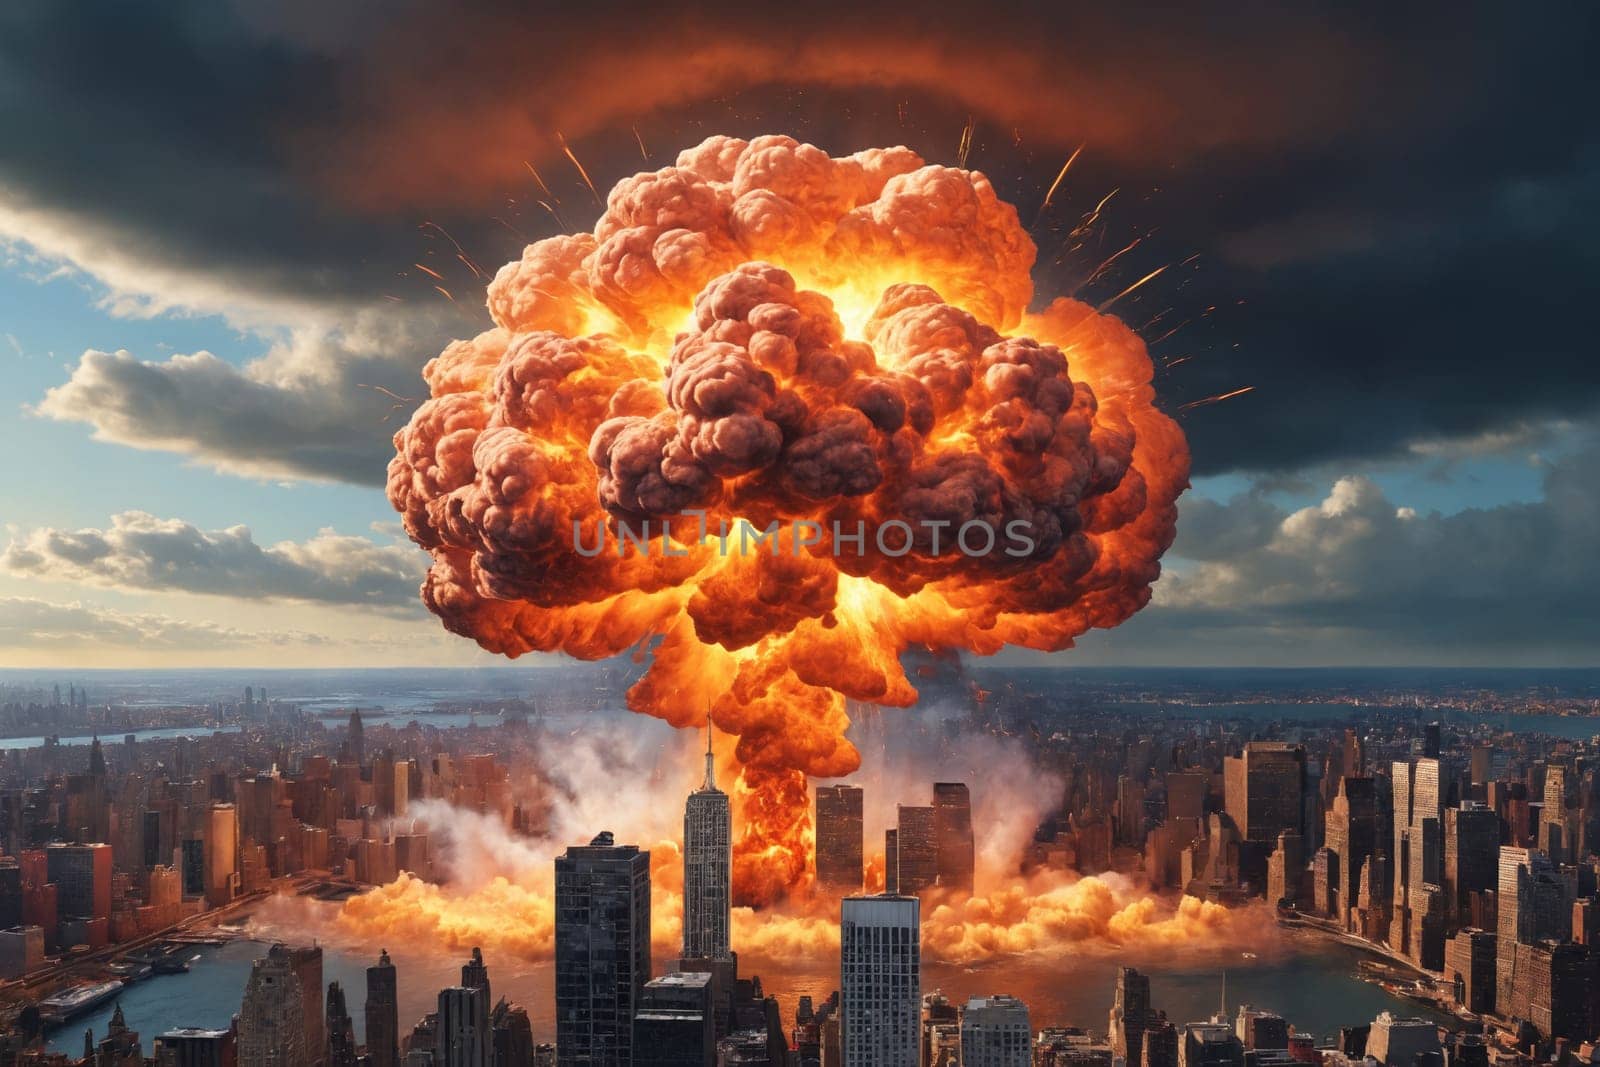 Urban Apocalypse: Mushroom Cloud Over Cityscape by Andre1ns